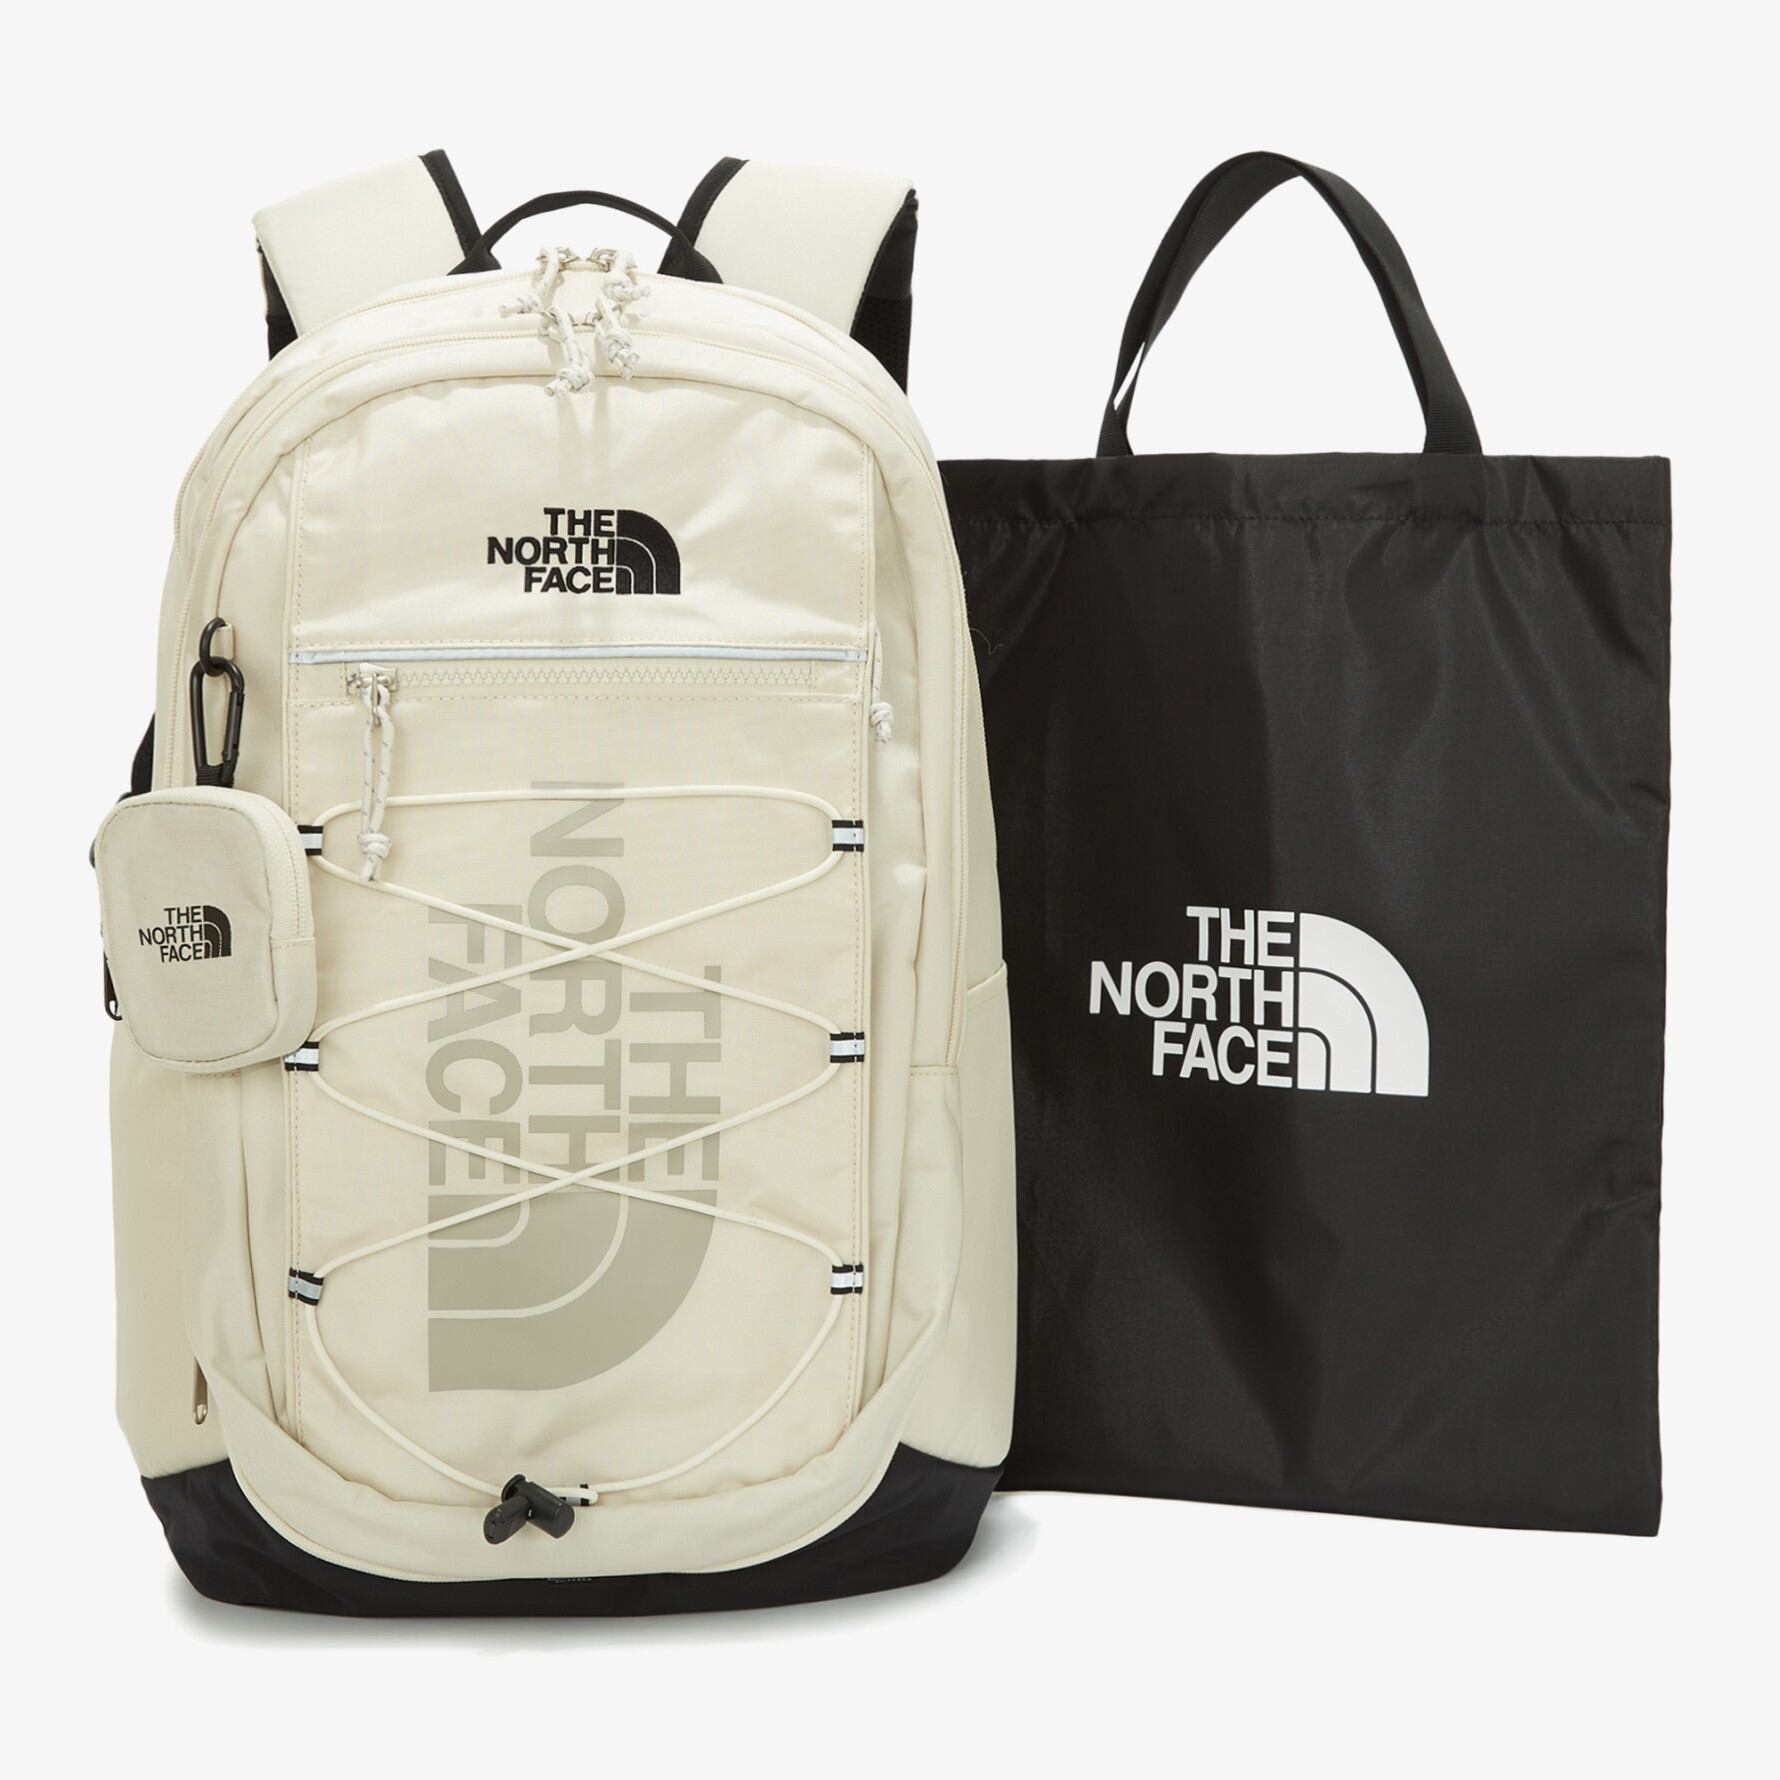 THE NORTHFACE SUPER PACK